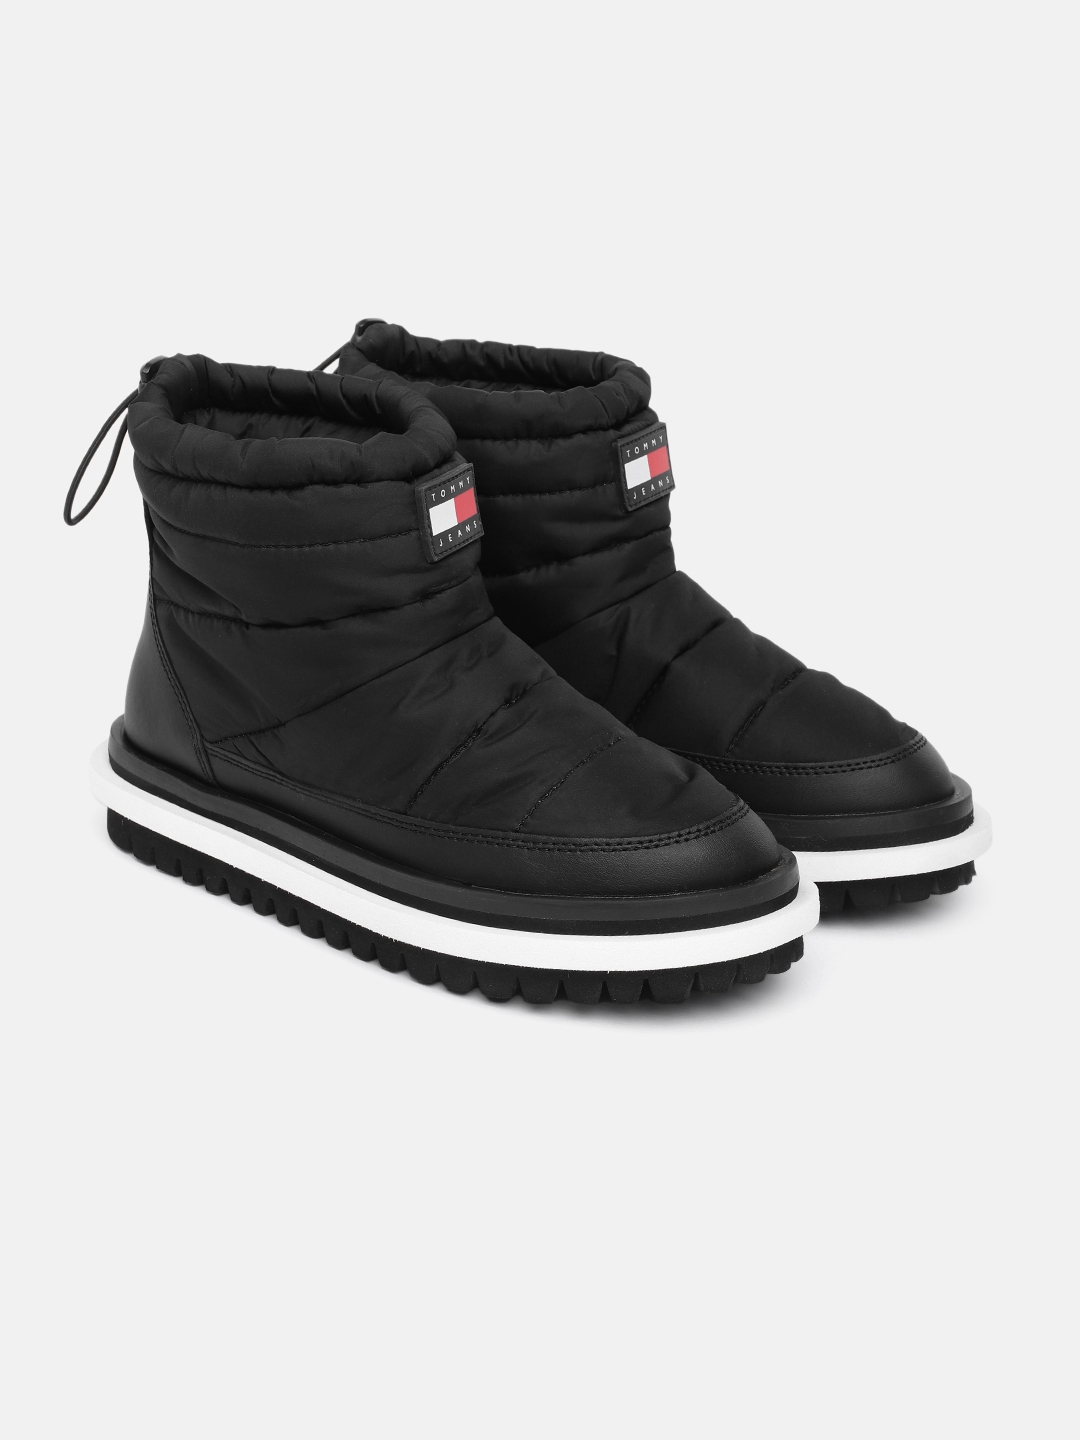 Buy Tommy Hilfiger Women Solid Padded Flat High Top Winter Boots ...